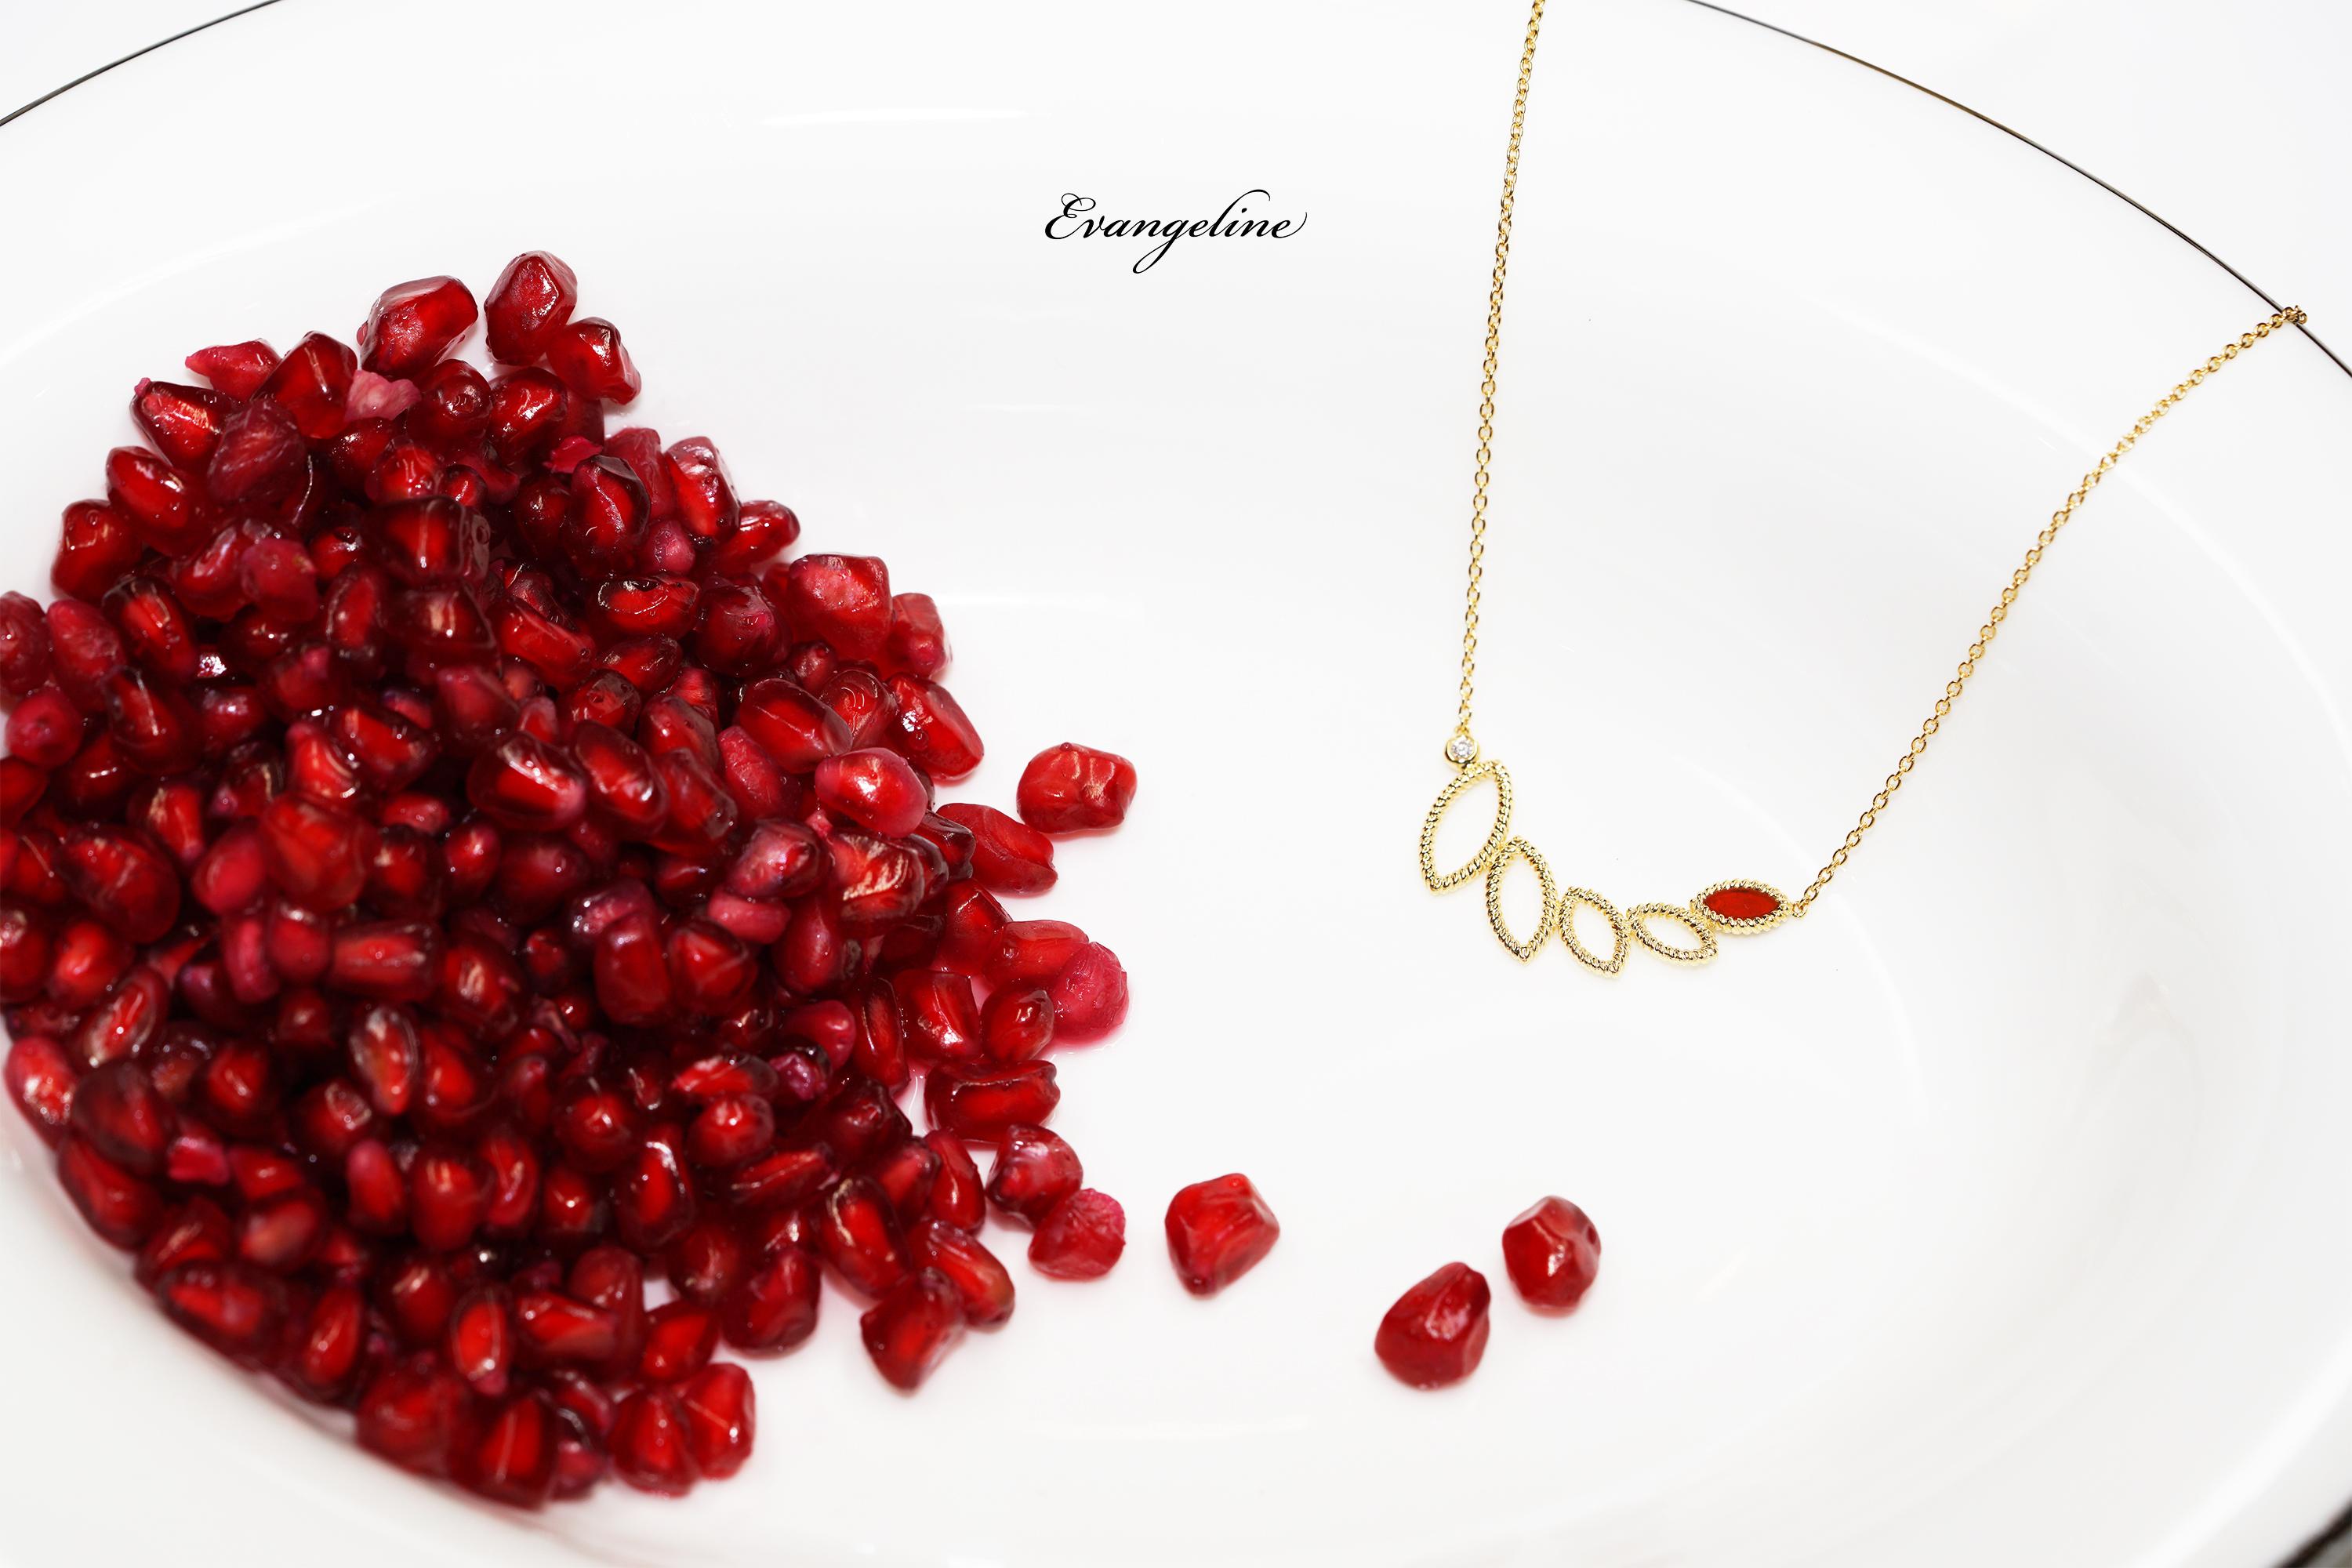 18k yellow gold, 5.4g.  
2 Diamonds, Total Carat Weight: 0.06ct
Stone: Carnelian

This charming necklace is the ideal piece for any occasion. As the latest addition to the popular Q Garden collection, the Mini Q Garden collection includes bracelets,